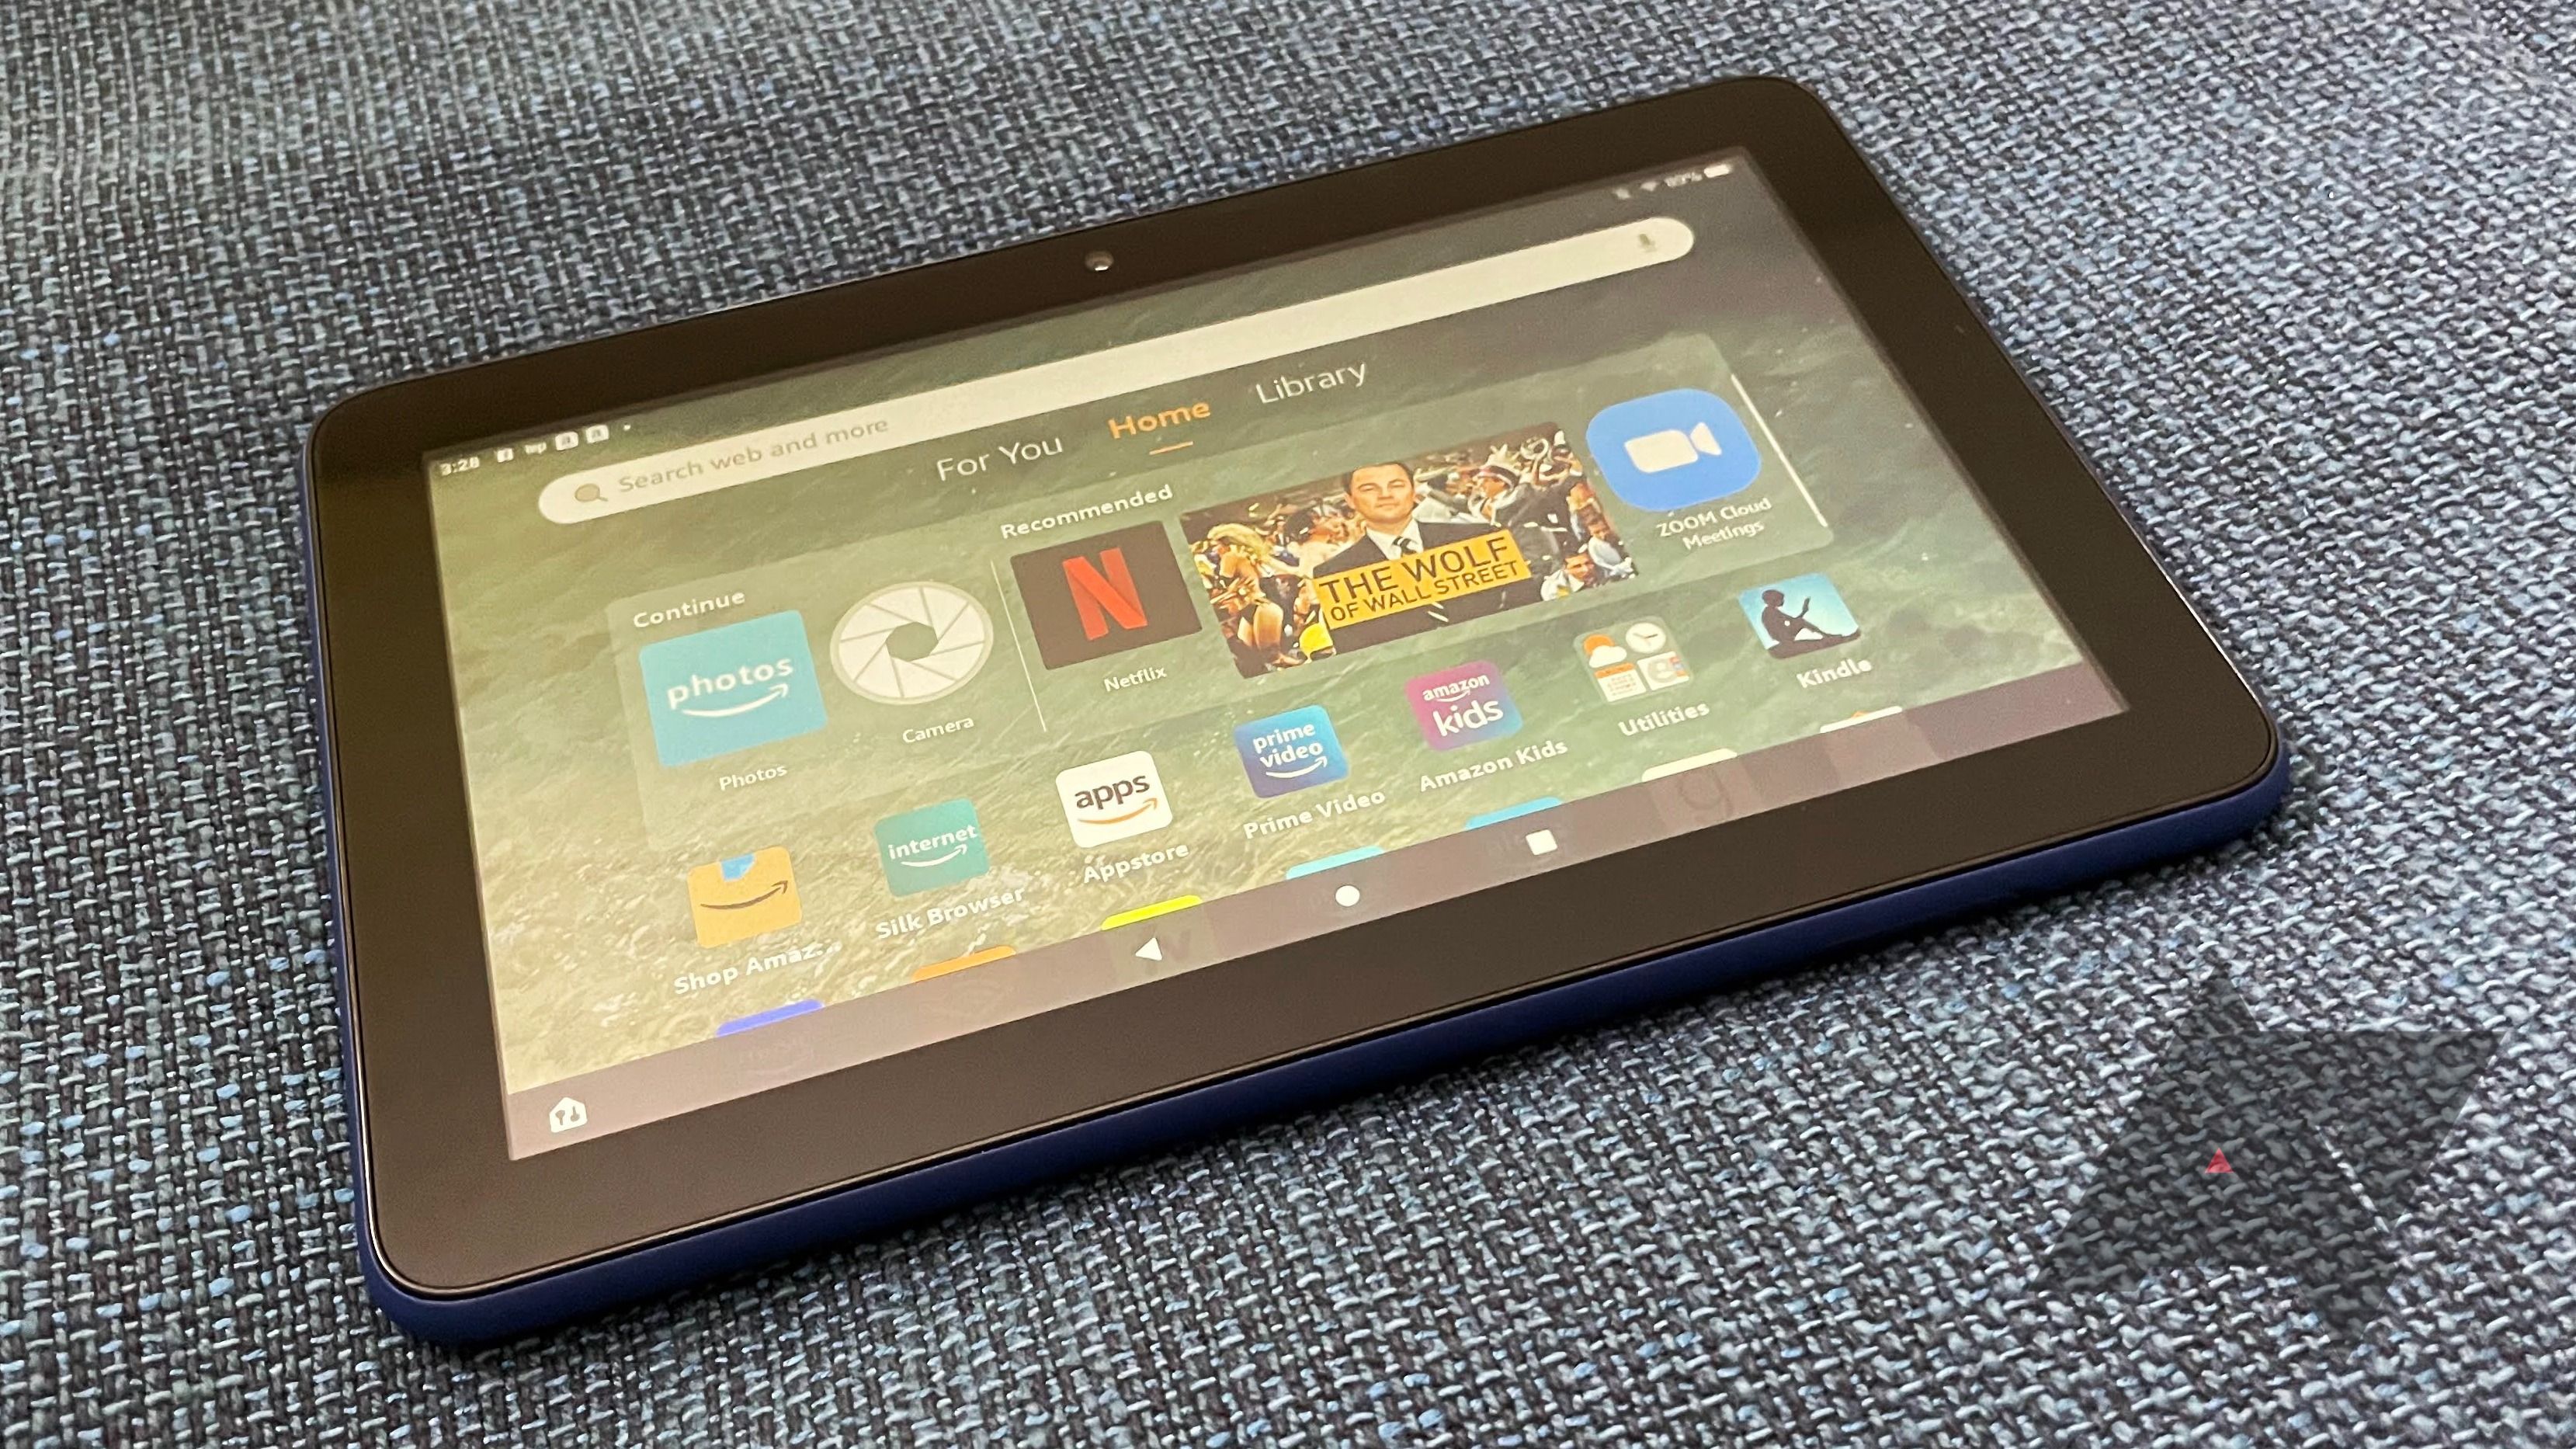 New  Fire 7 Tablet Comes With a Faster Processor, USB-C and